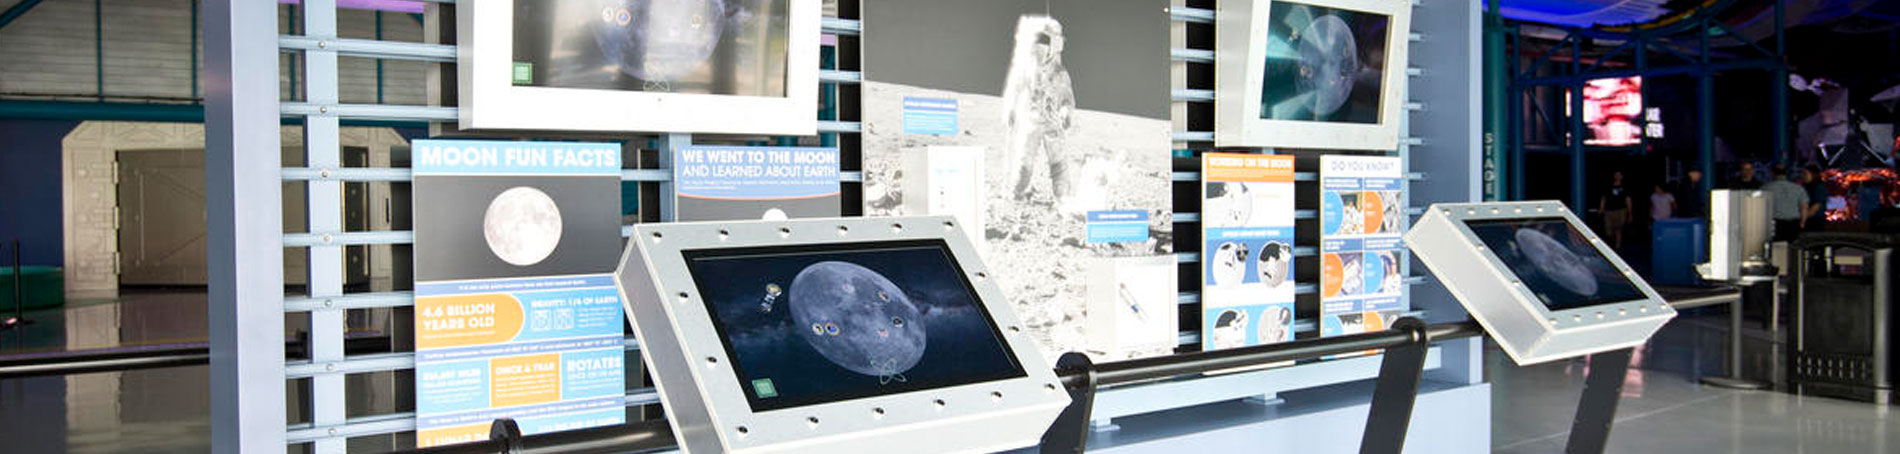 Explore interactive displaying displaying the moon and its six Apollo landing sites.